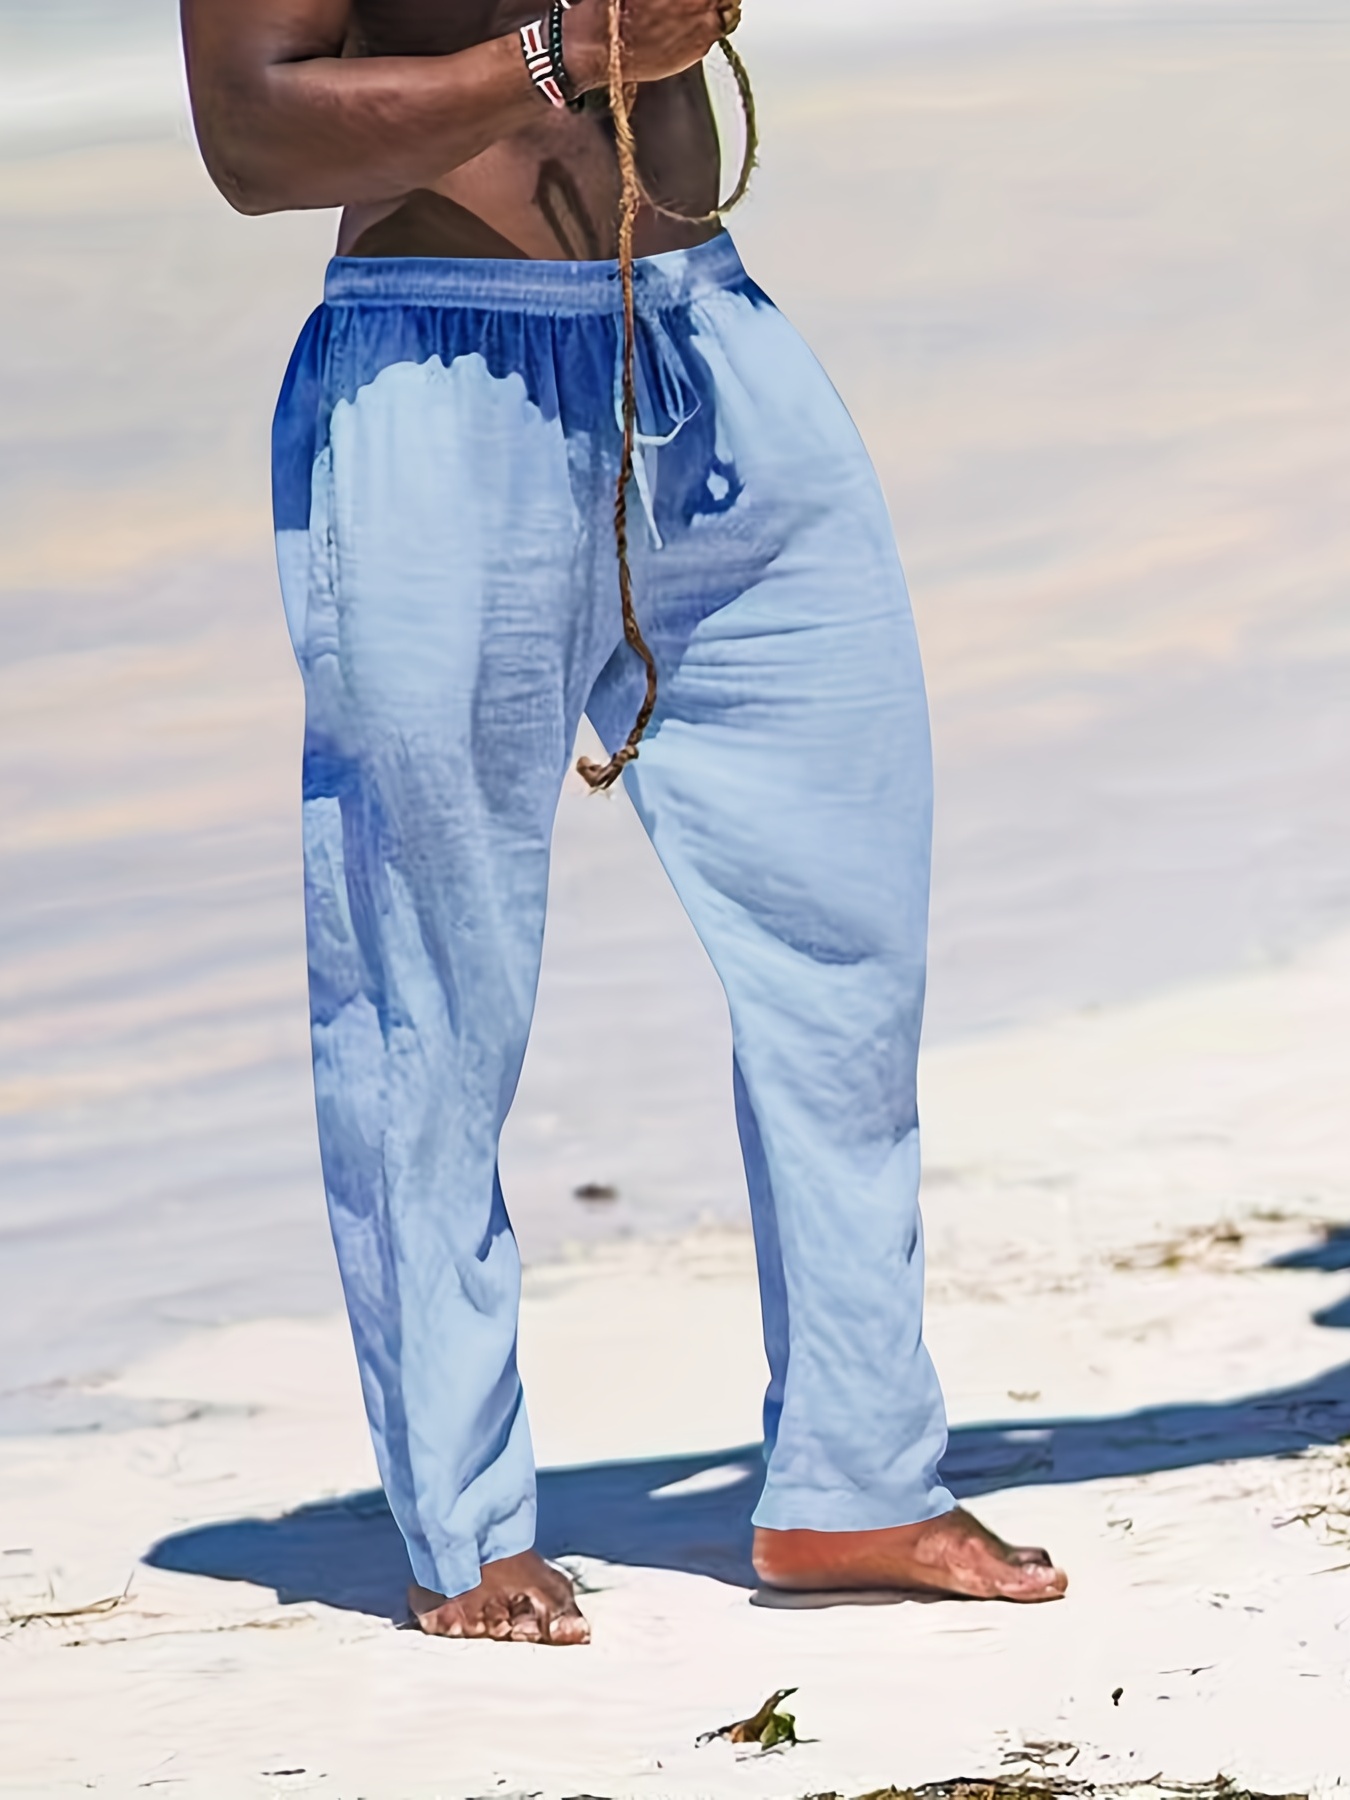 The 14 Best Beach Pants for Men to Wear in Summer 2022